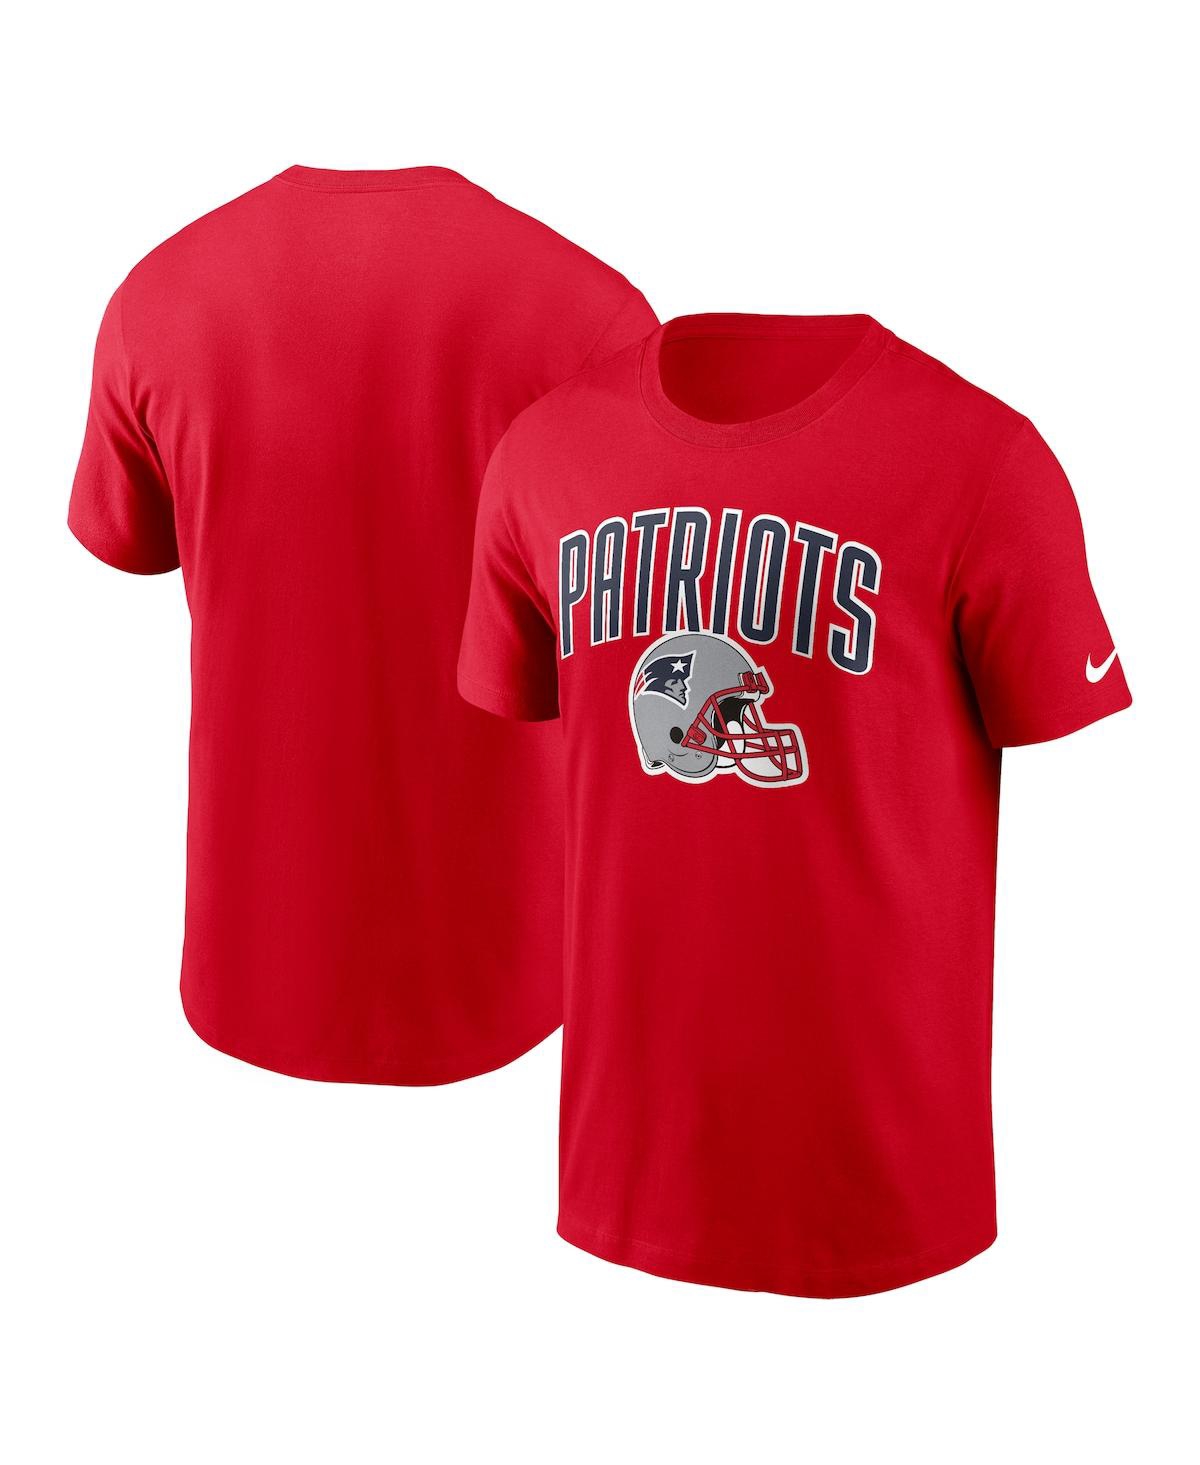 Nike Men's  Red New England Patriots Team Athletic T-shirt